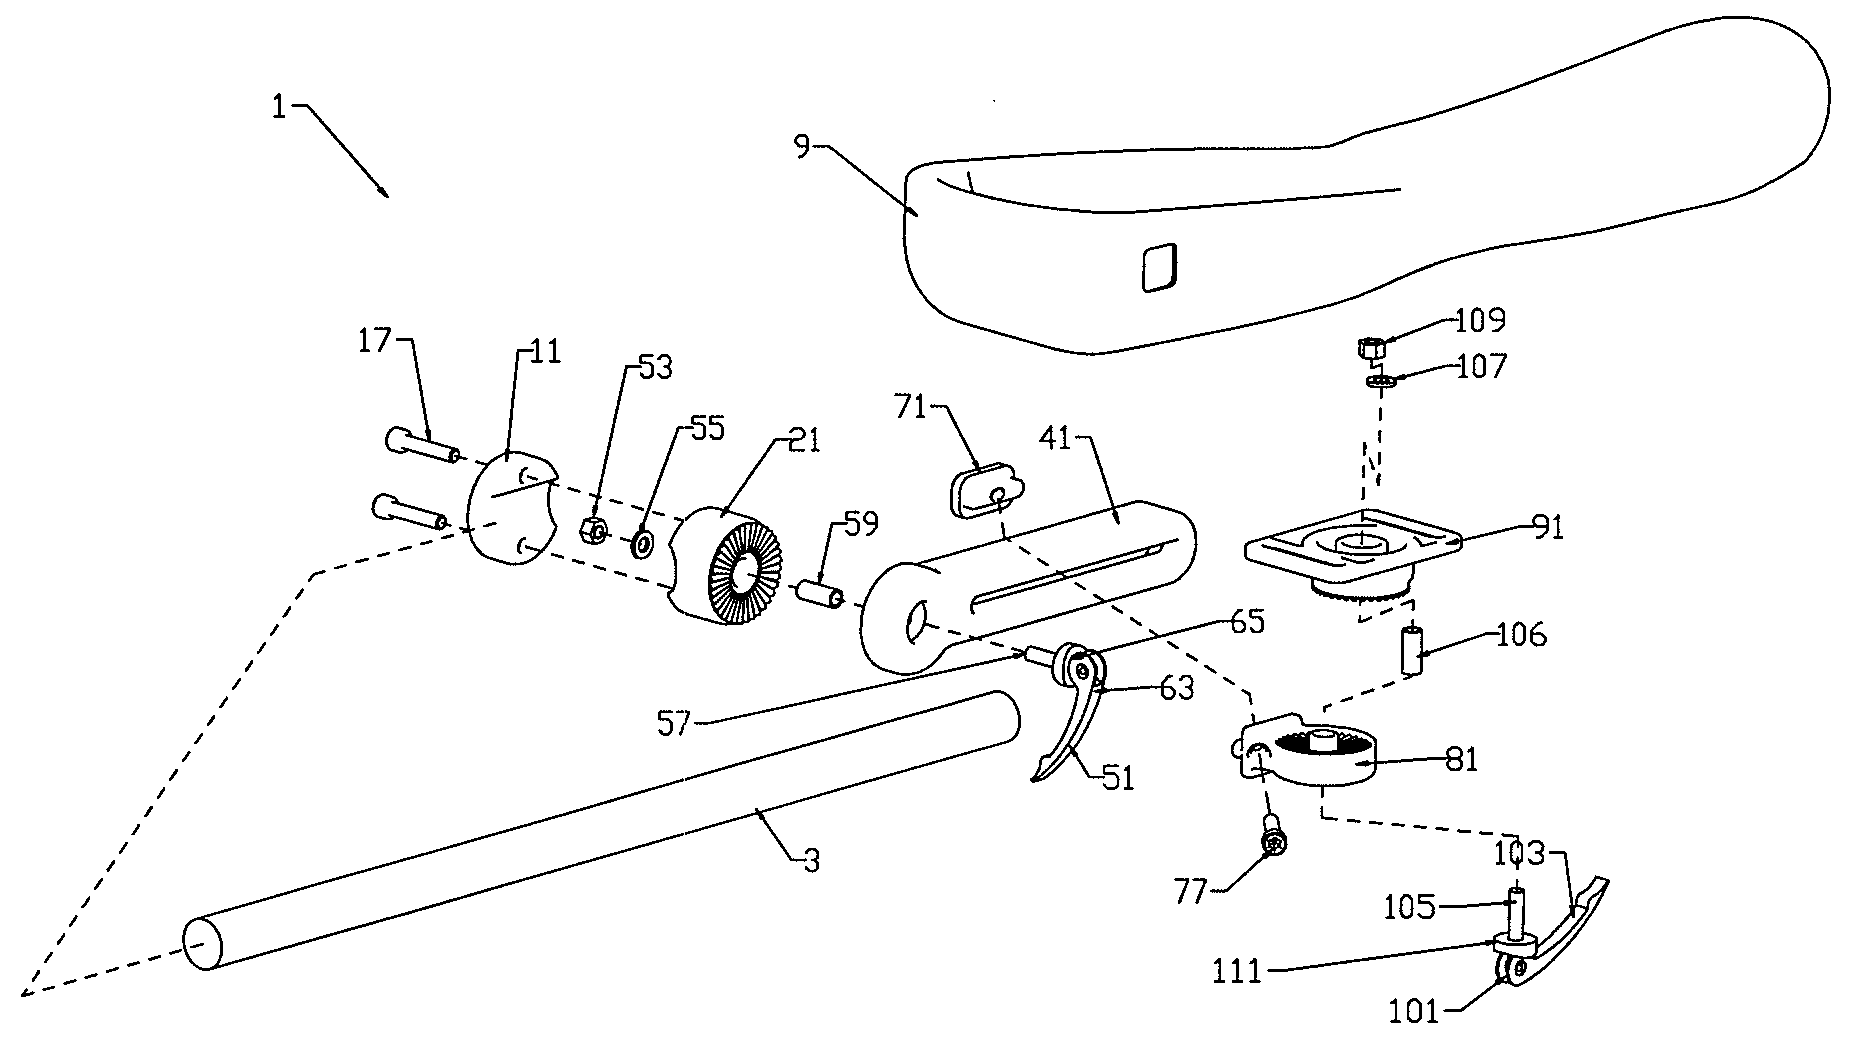 Apparatus for mounting a wheelchair arm pad